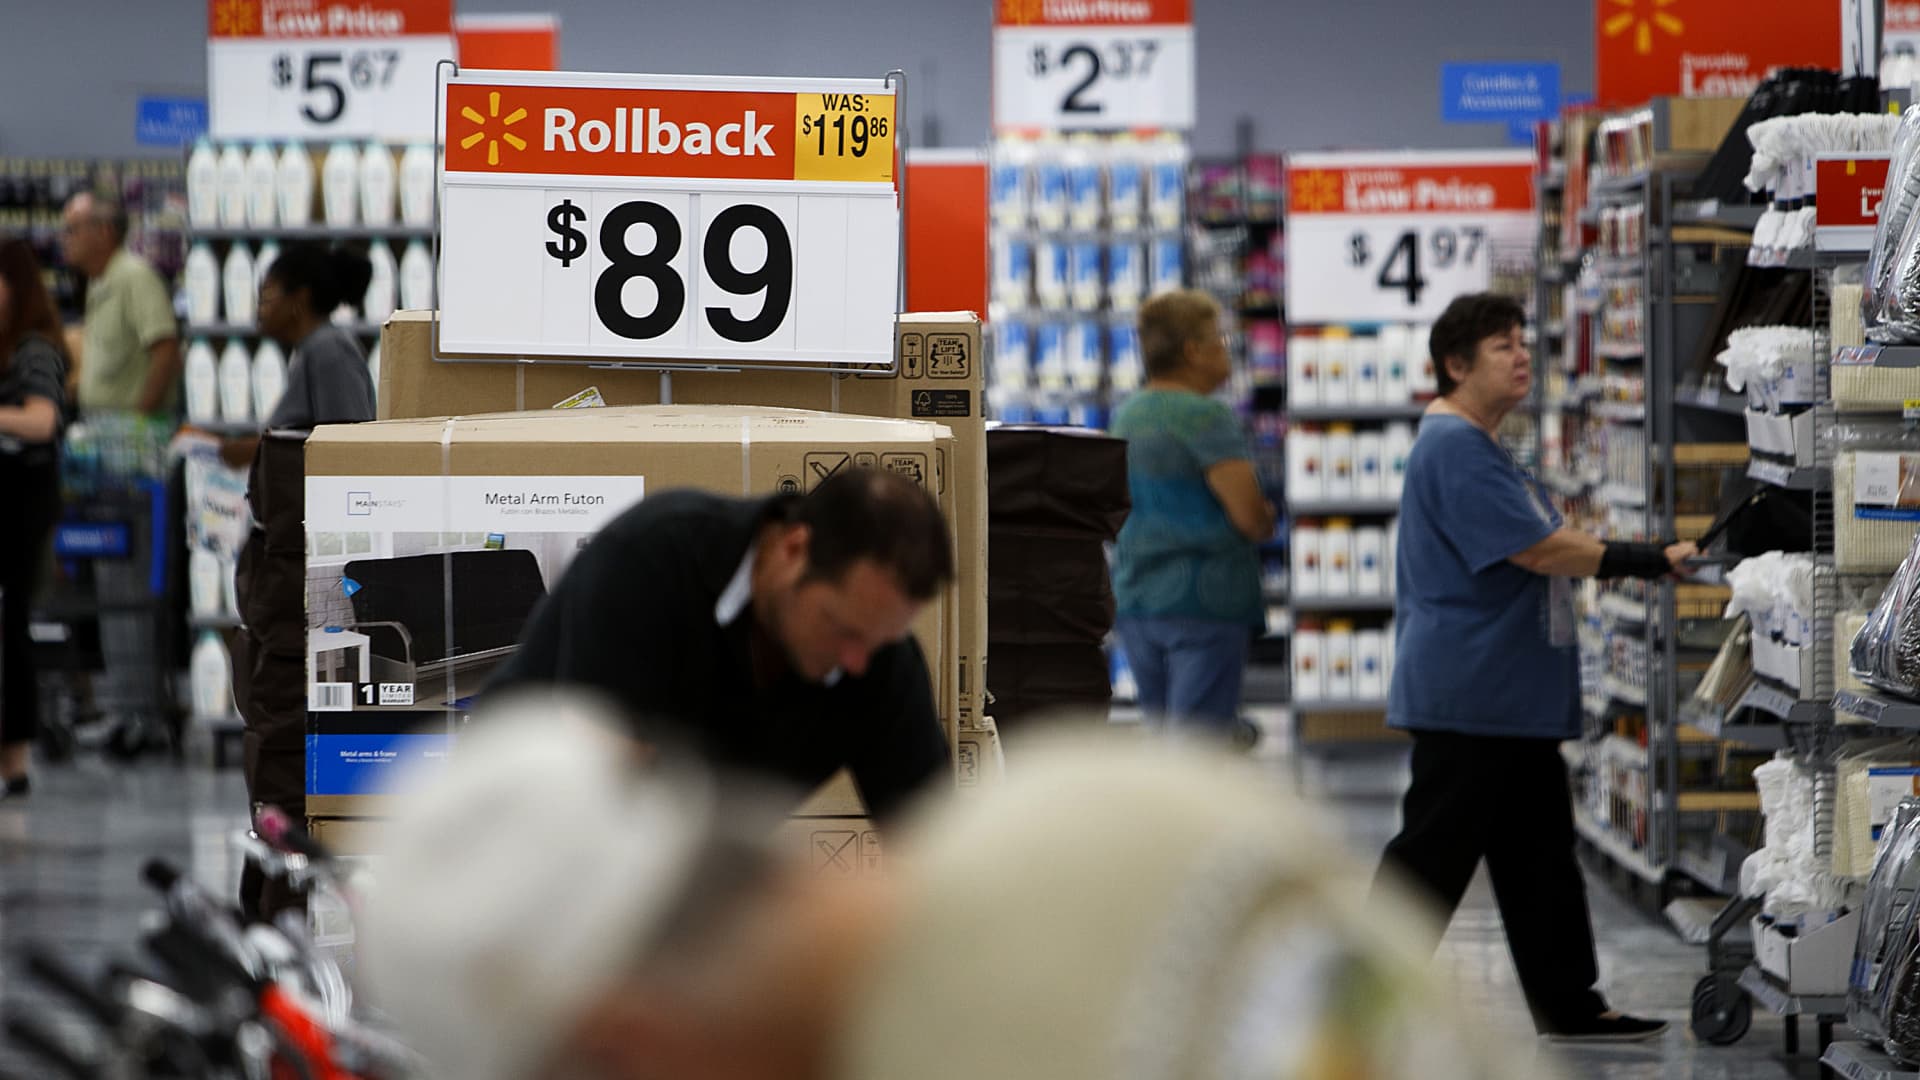 Walmart Rollback pricing signs are displayed while customers shop during the grand opening of a new Wal-Mart Stores location in Torrance, California.